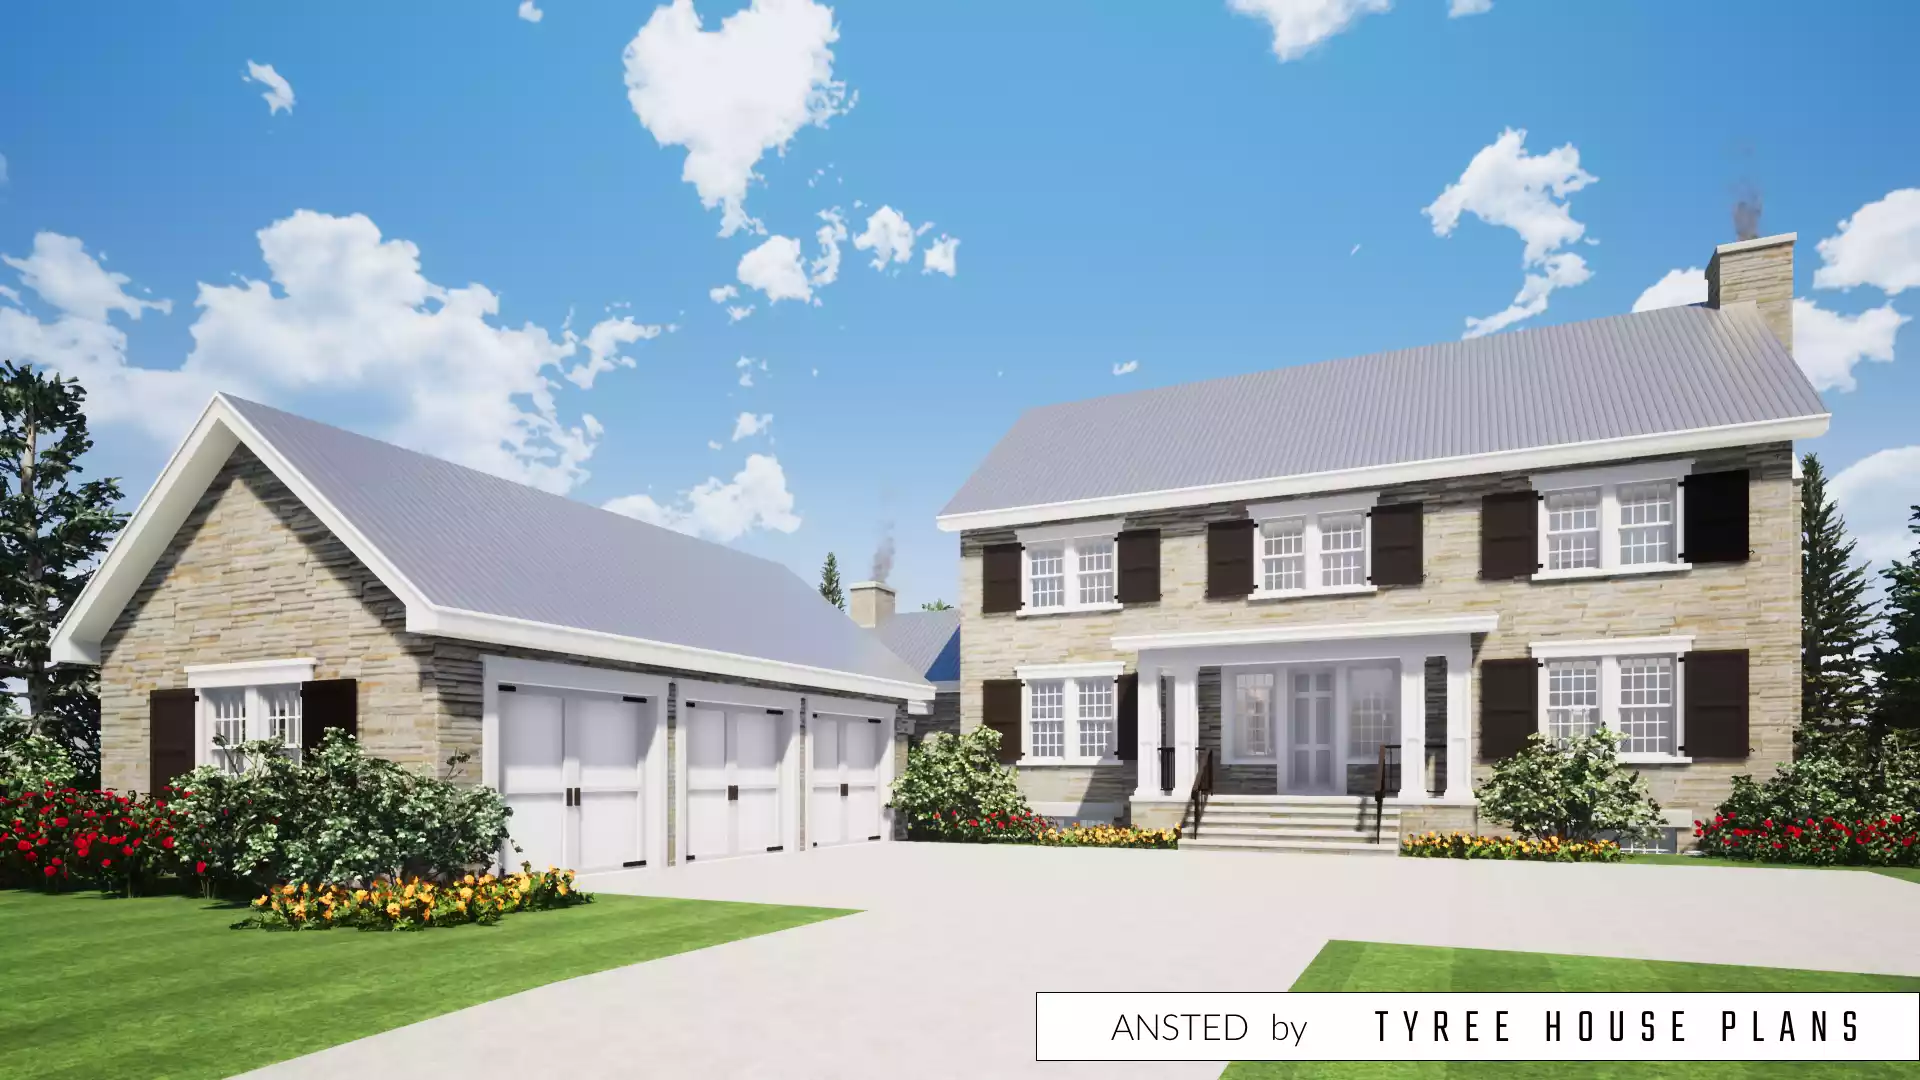 Front view. Ansted by Tyree House Plans.